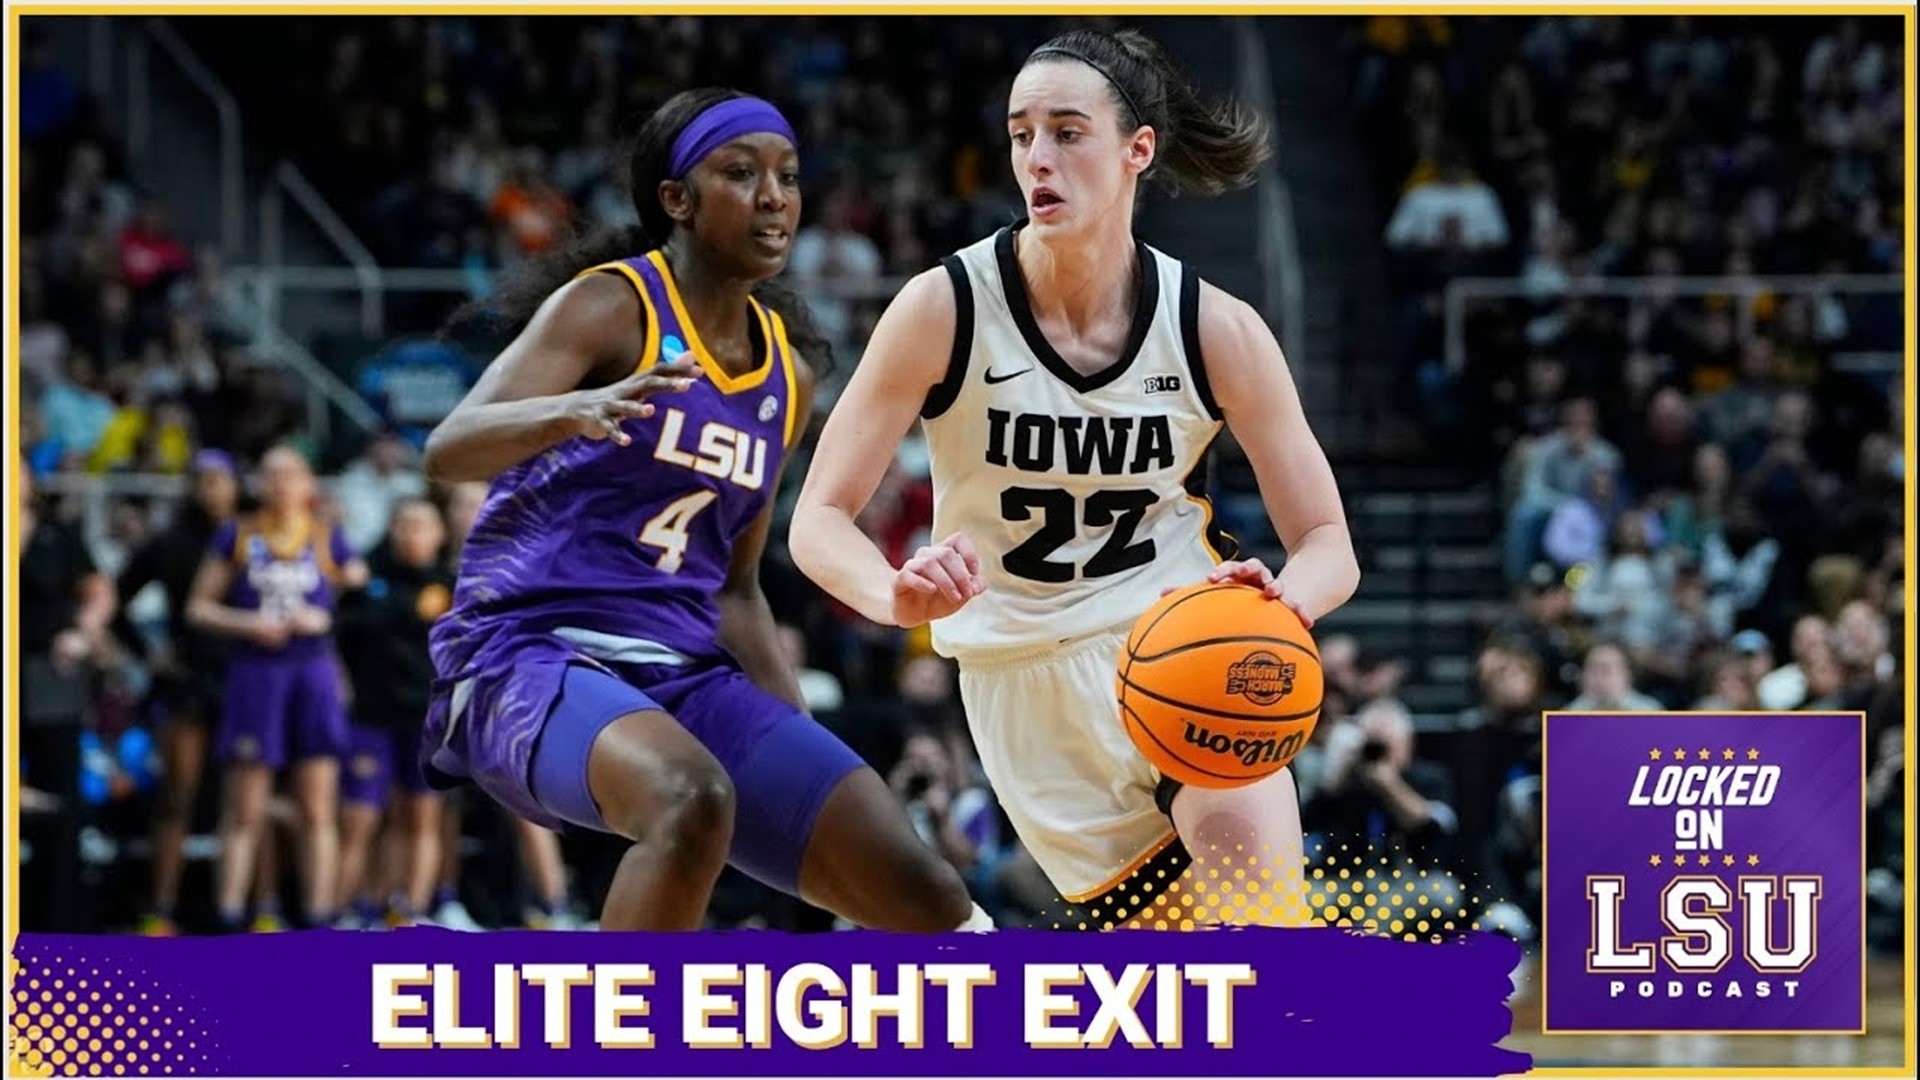 LSU women's basketball team's season will end in Albany as the Tigers fall to Caitlin Clark and the Iowa Hawkeyes 94-87 in the Elite Eight.